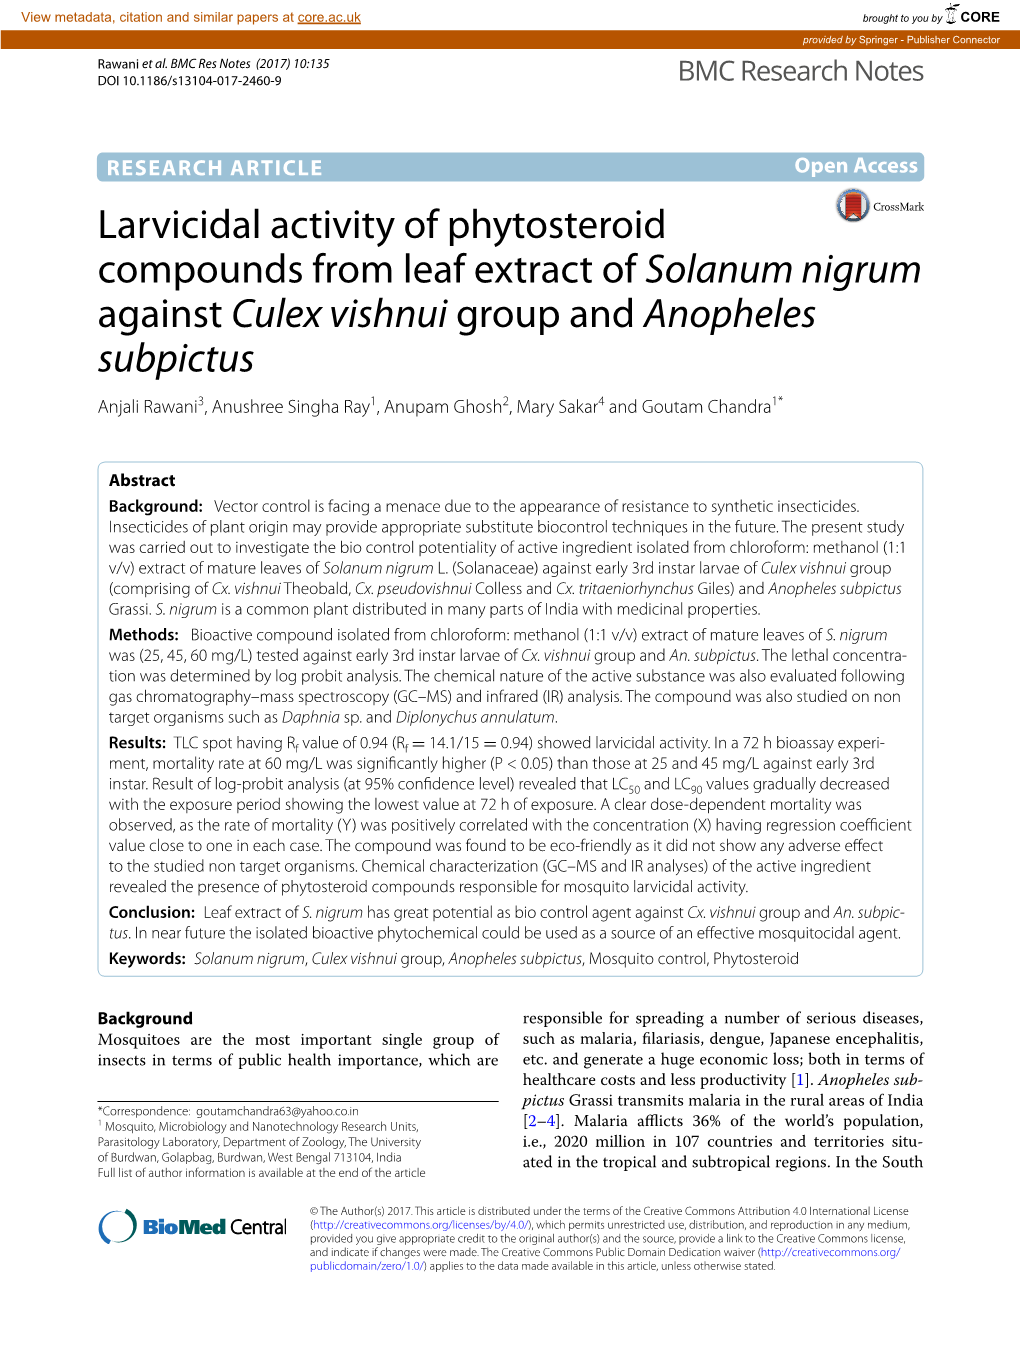 Larvicidal Activity of Phytosteroid Compounds from Leaf